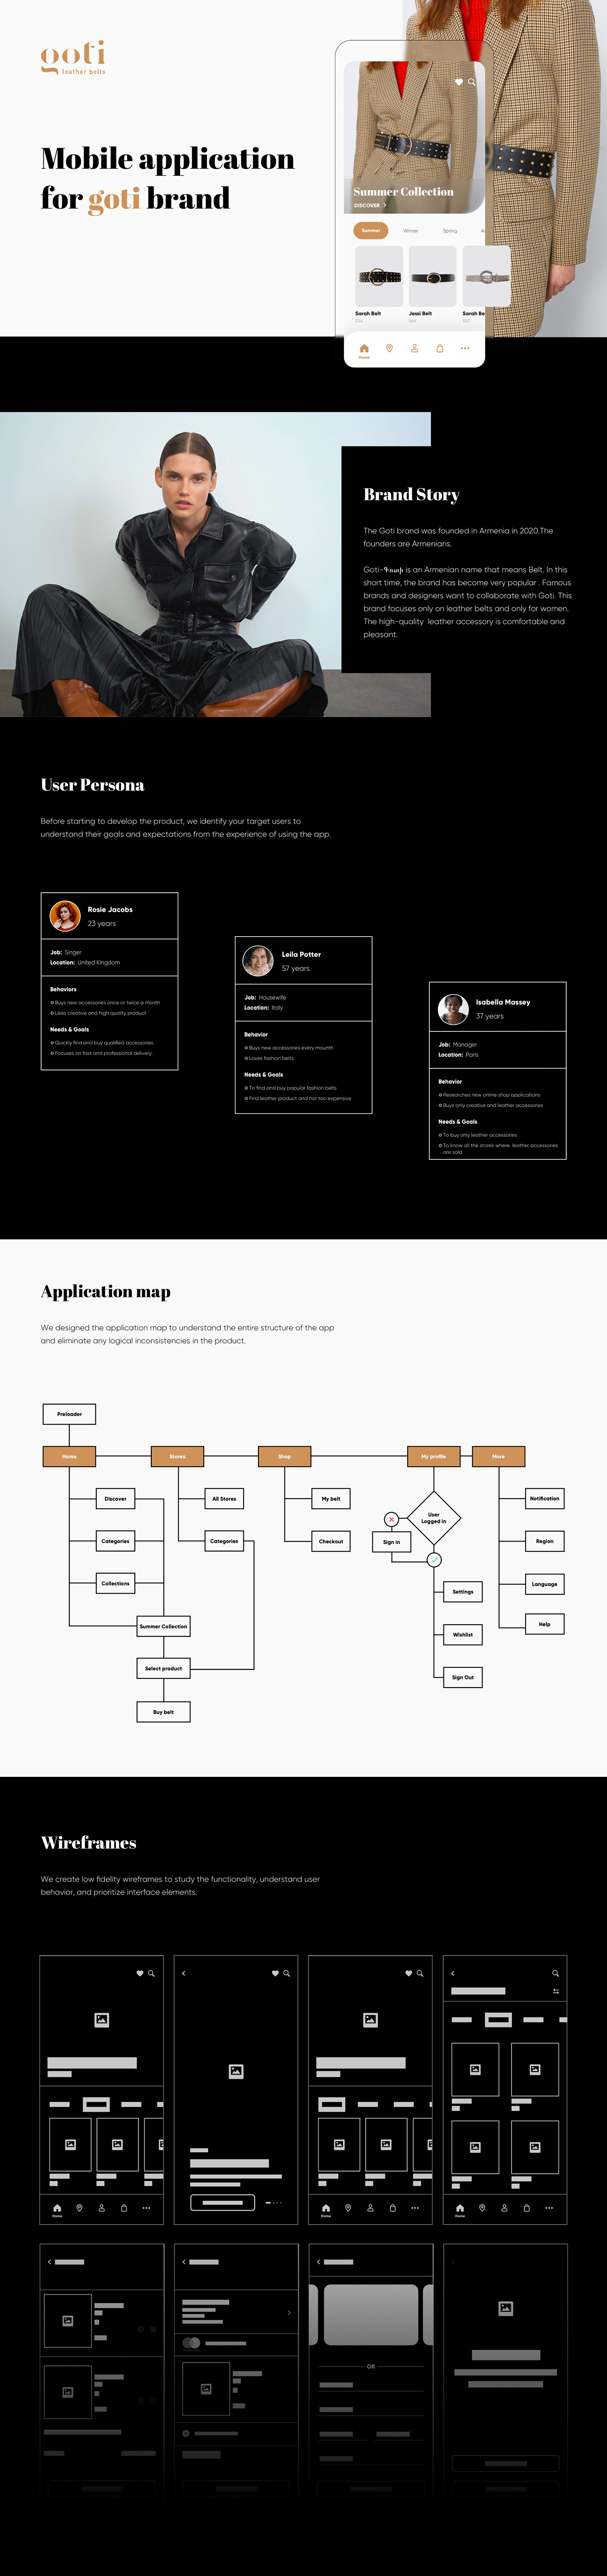 animation  background research Customer Journey Map information architecture  ios mobileapplication Prototyping user persona User research userflow